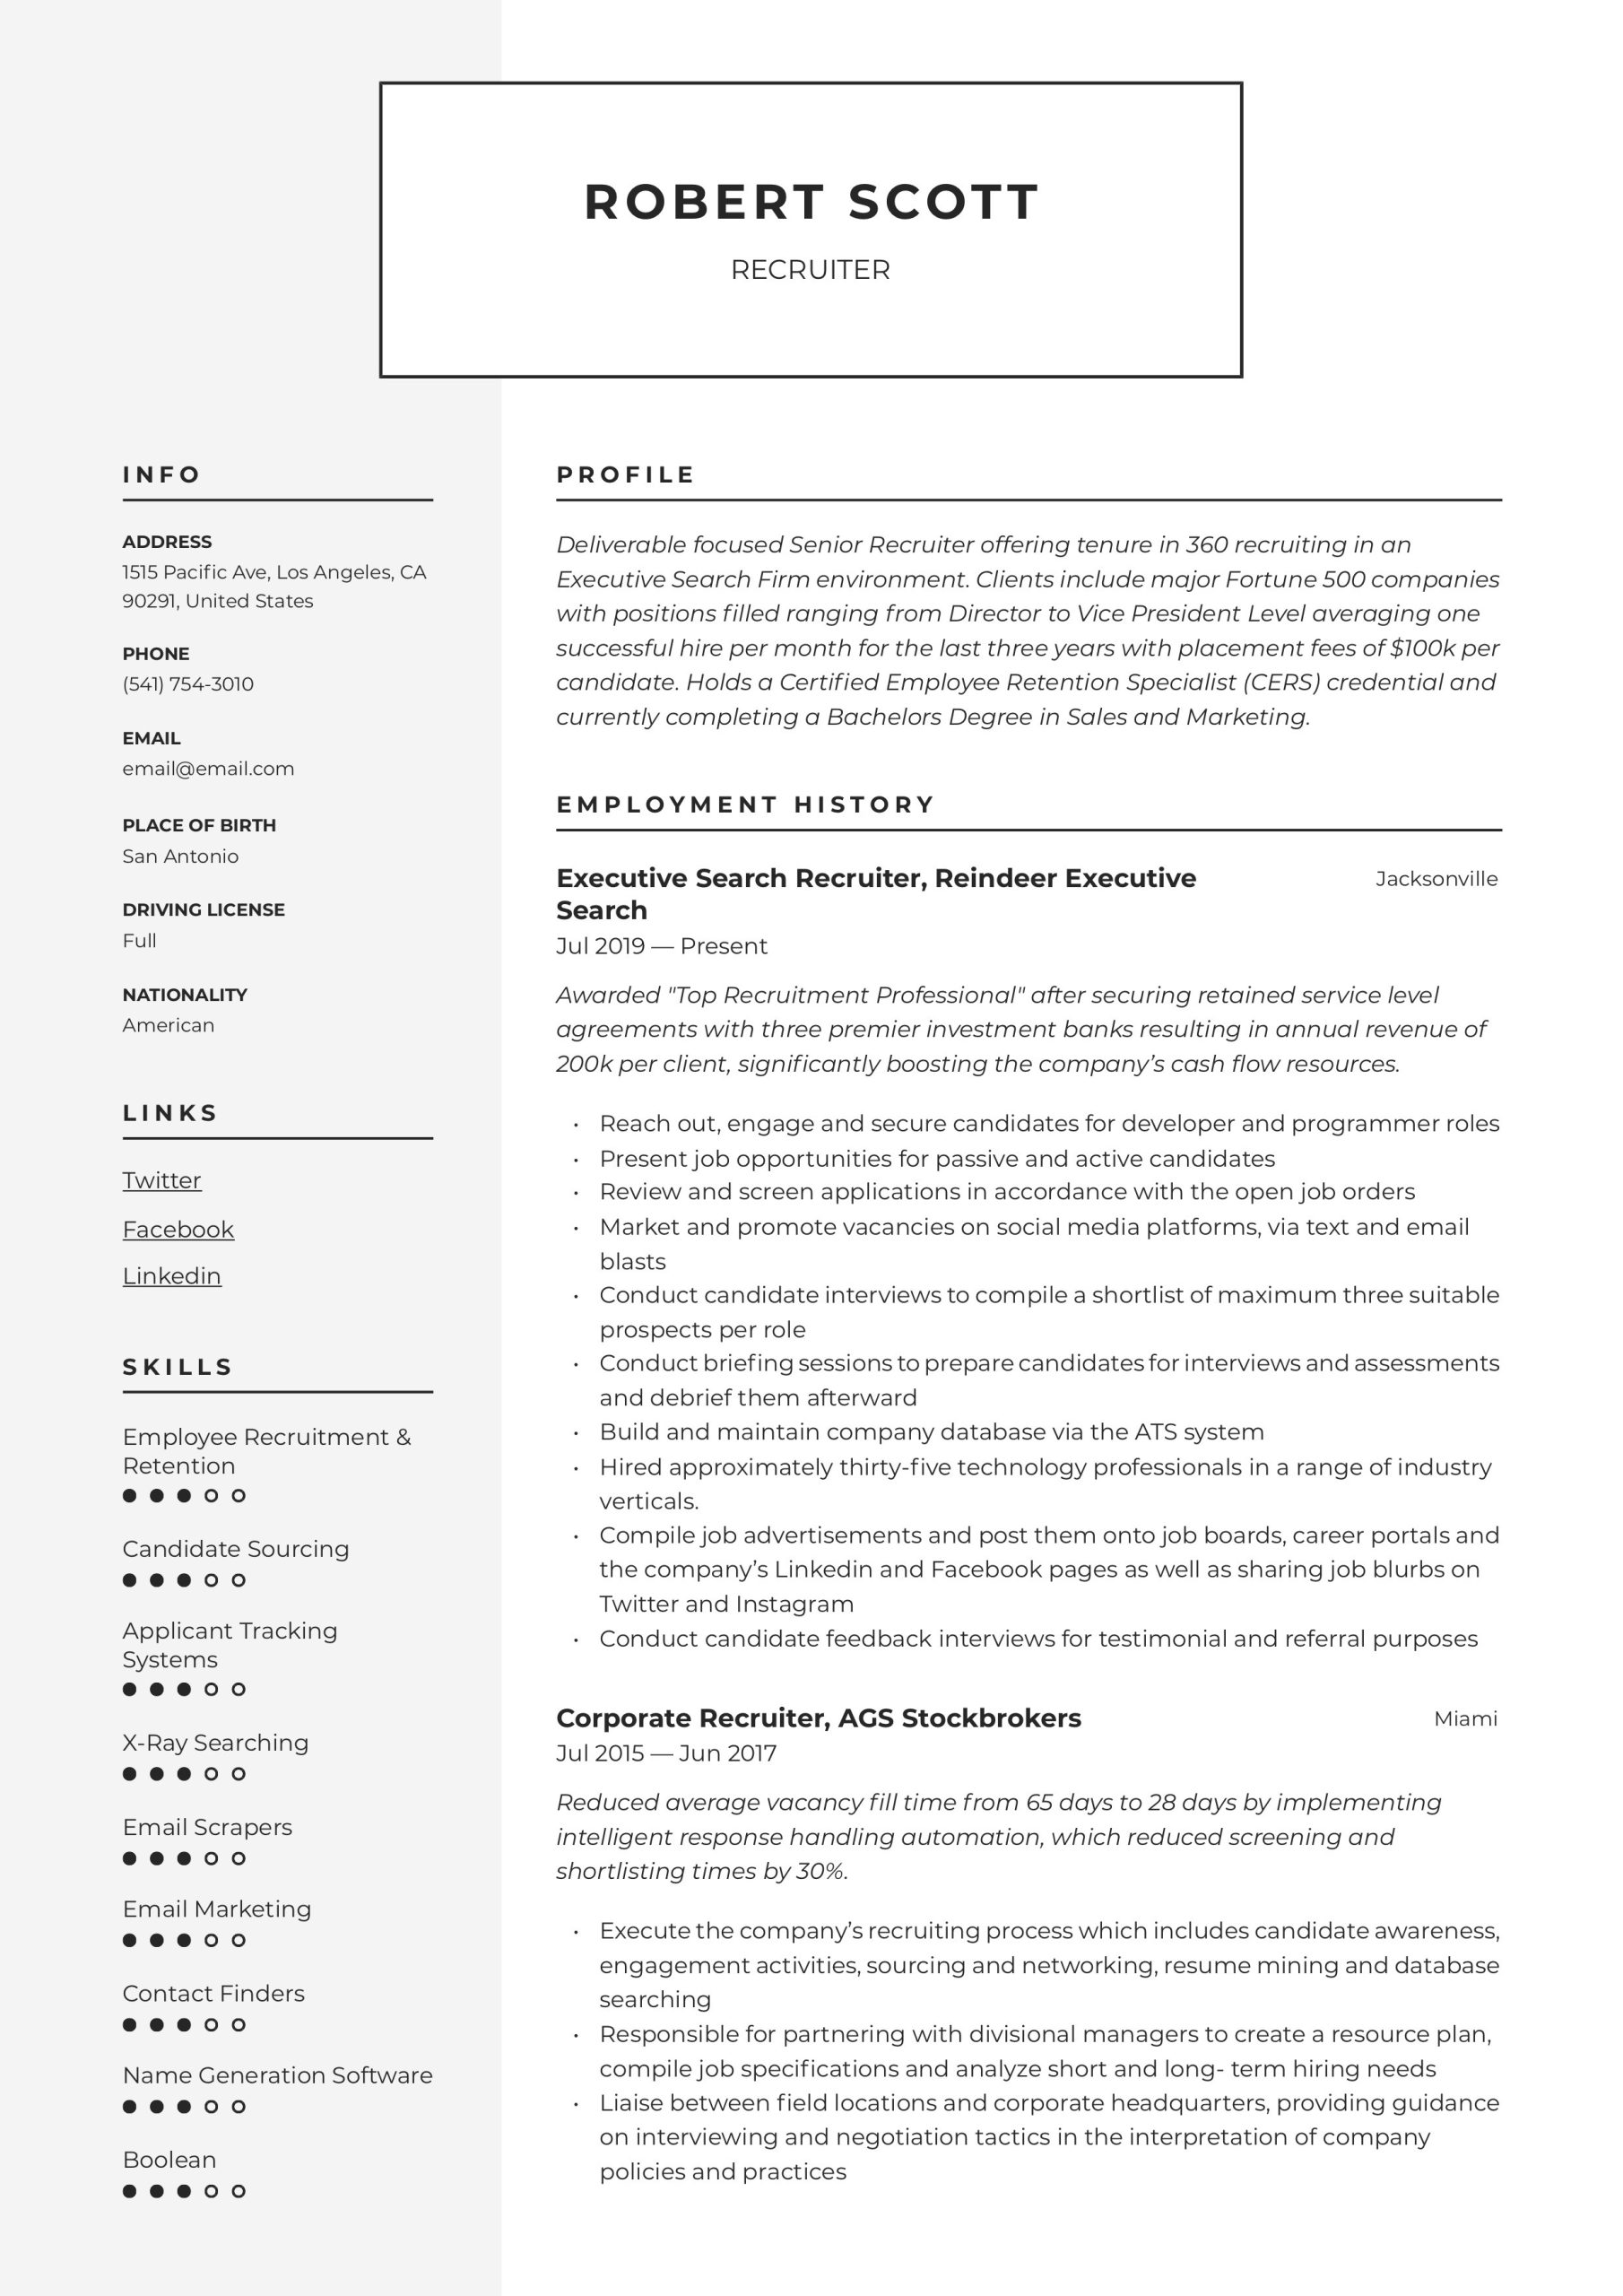 Recruitment Consultant Resume Sample No Experience Recruiter Resume & Writing Guide 22 Examples 2022